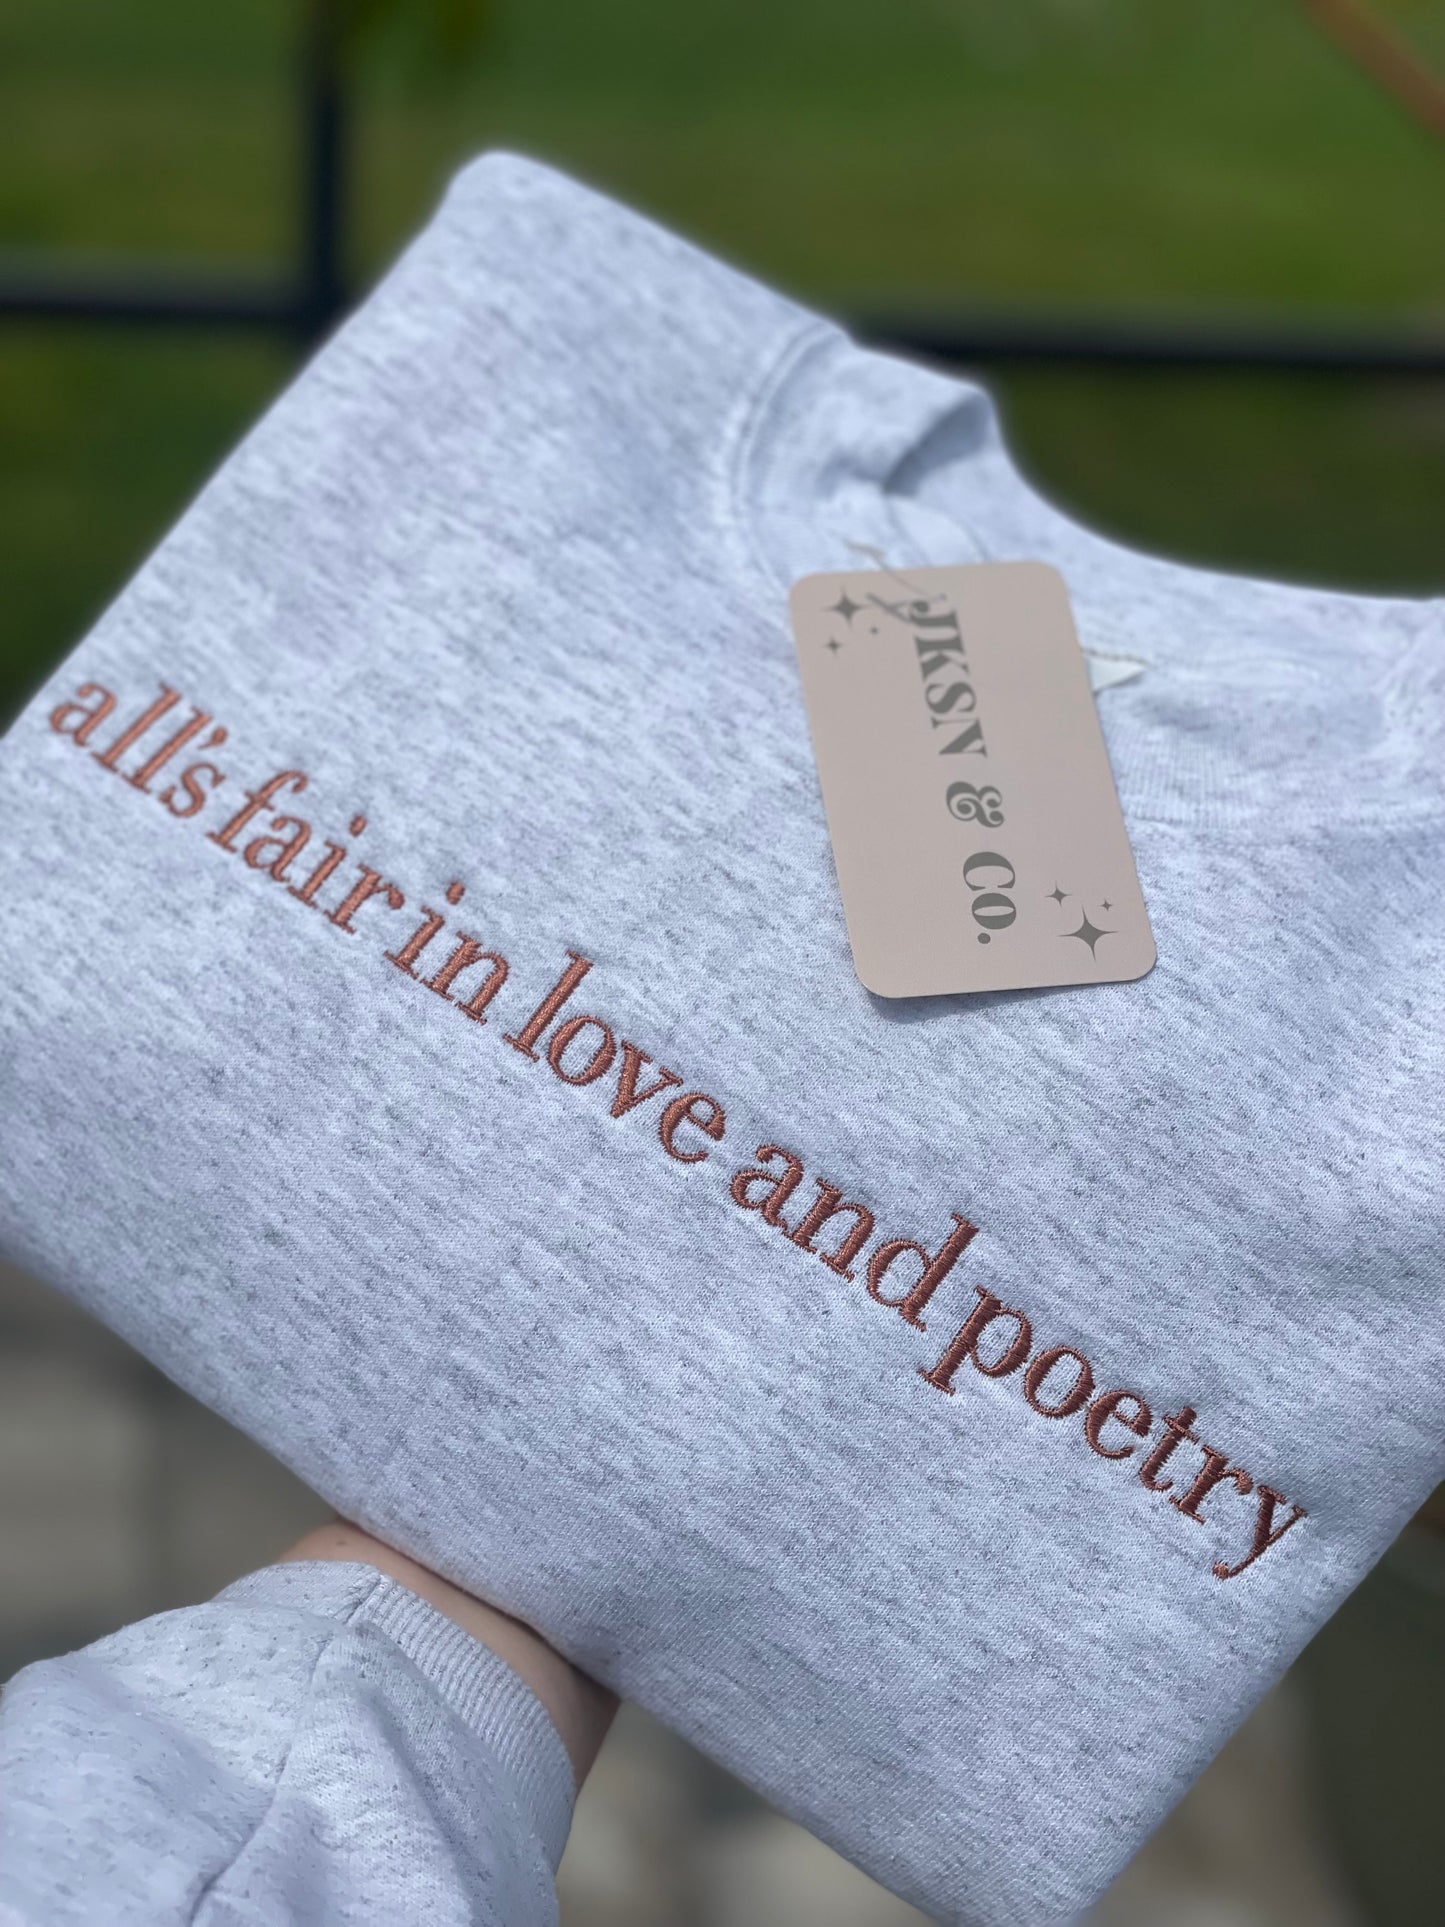 All’s Fair in Love and Poetry Embroidered Crewneck -- TTPD Inspired Sweatshirt, Tourtured Poets Inspired Crewneck